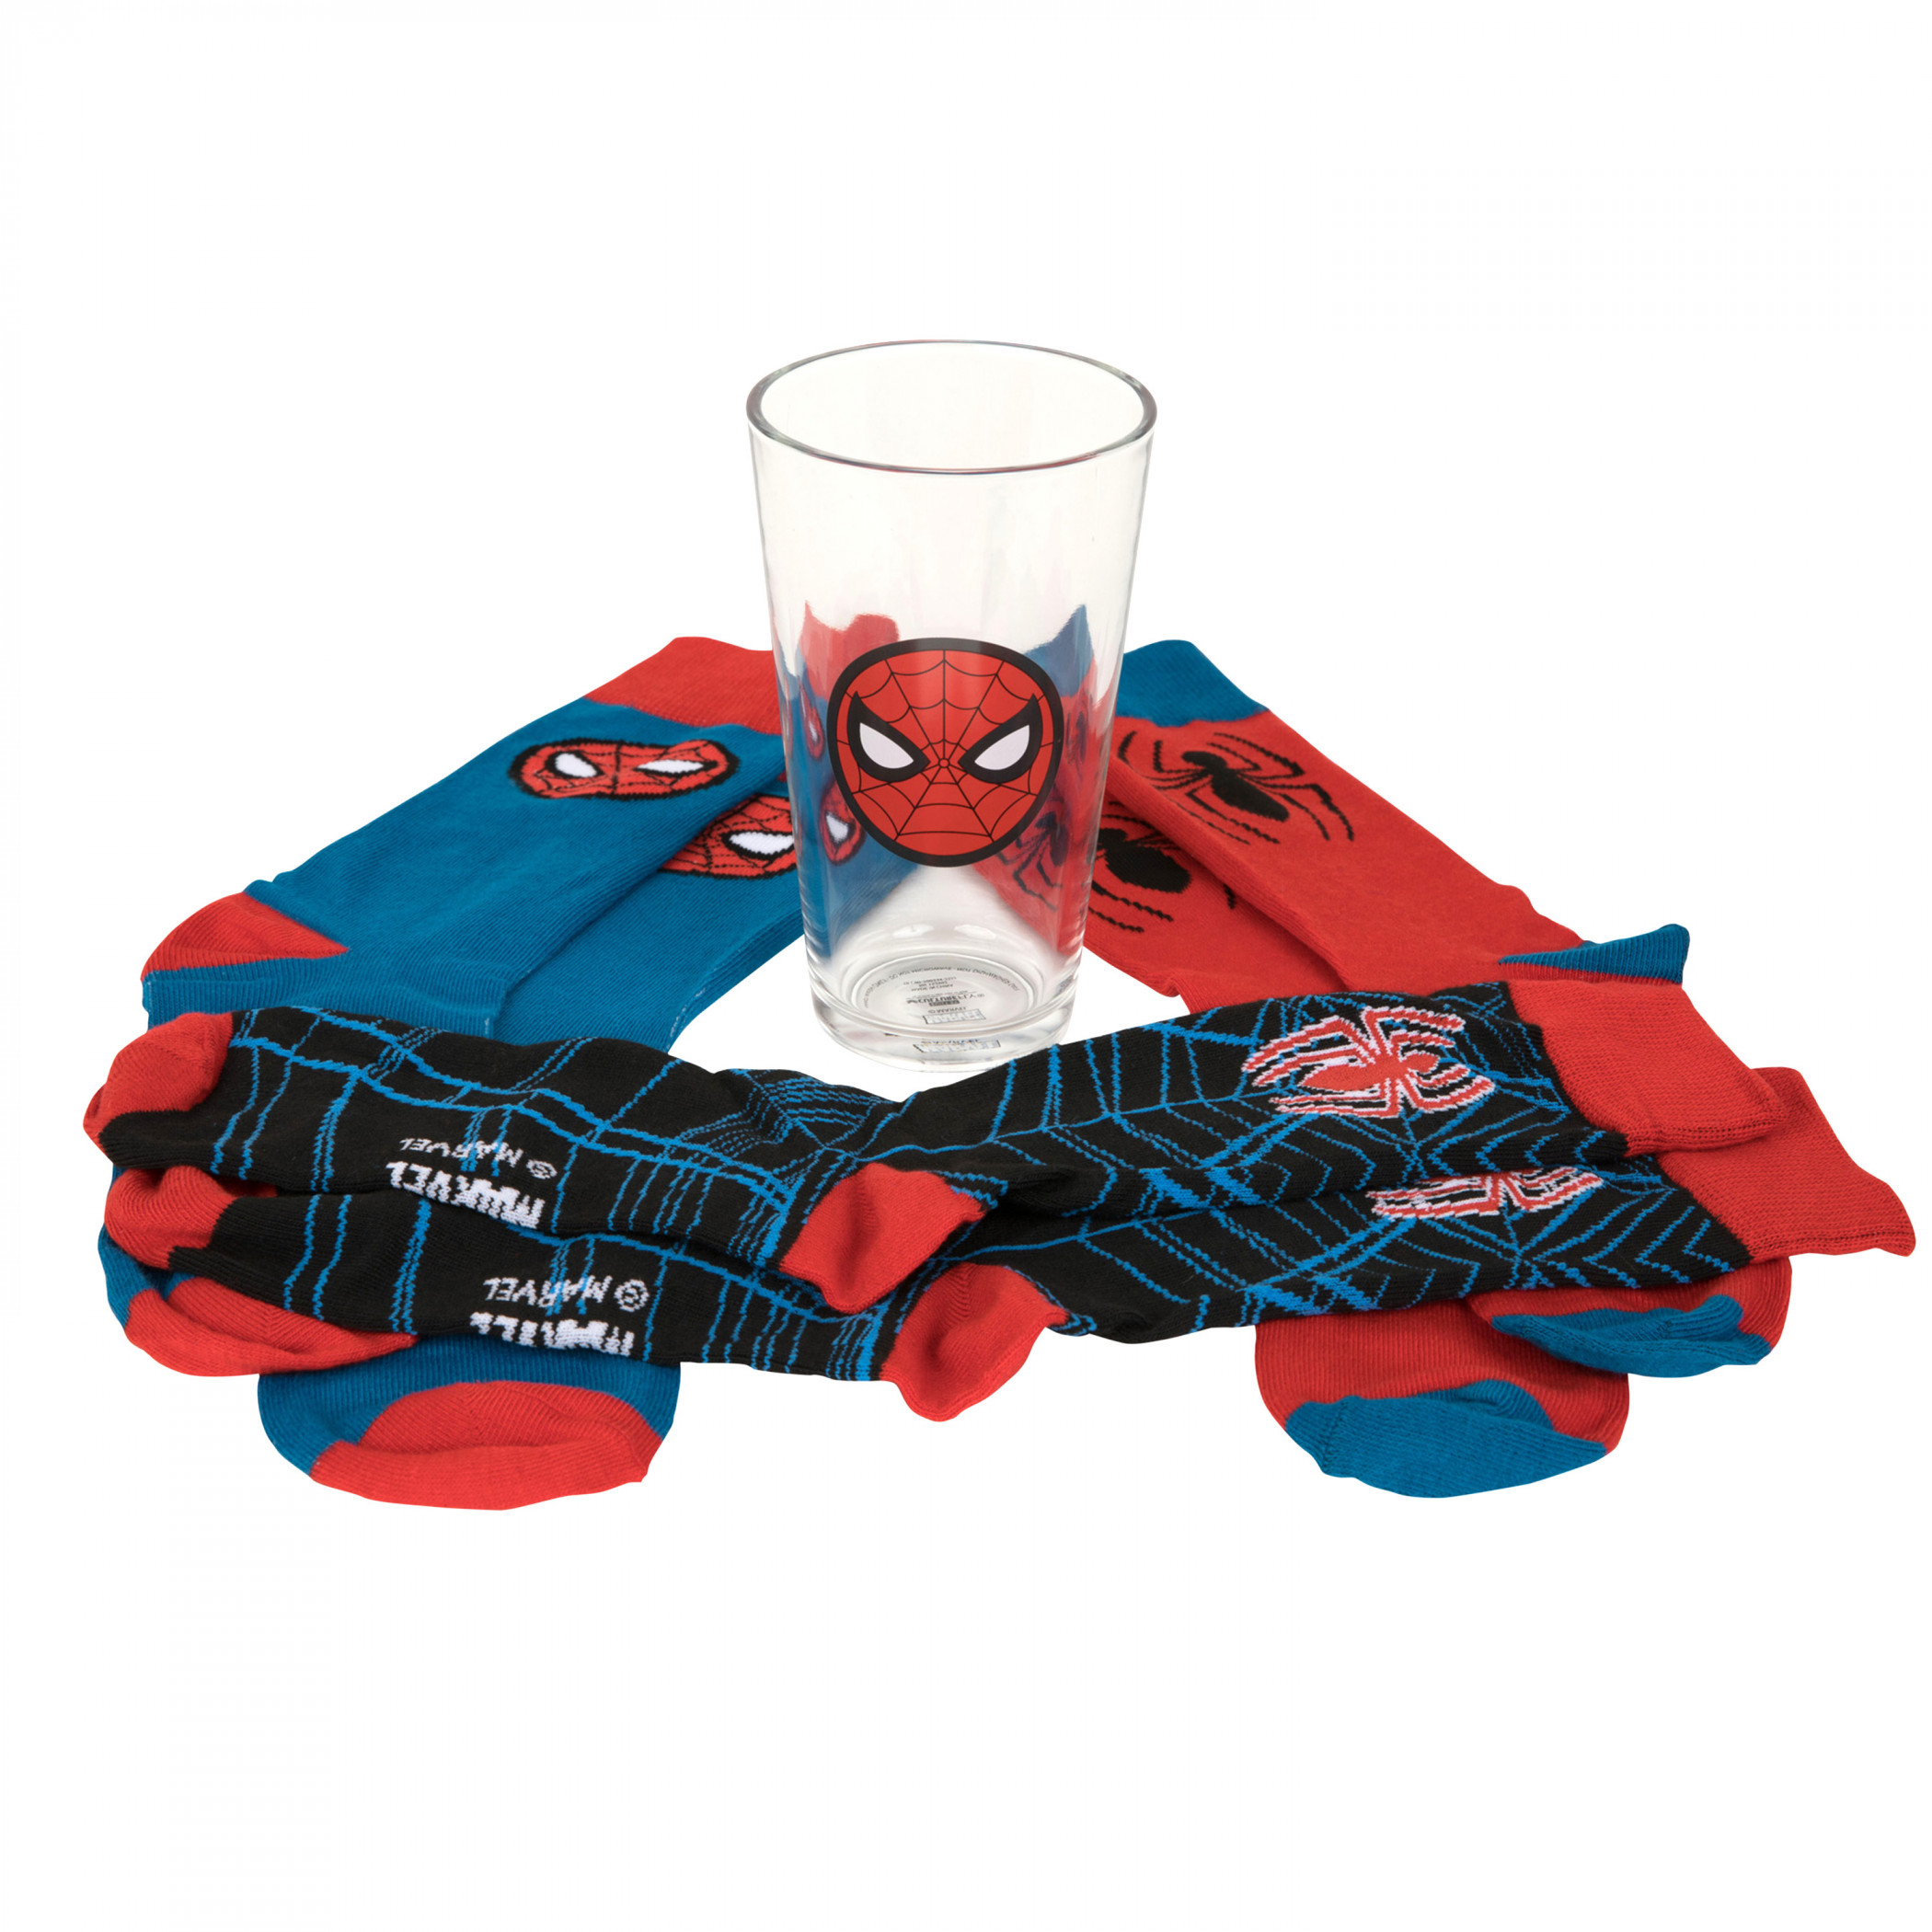 Spider-Man 3-Pack of Crew Socks and Pint Glass Gift Set